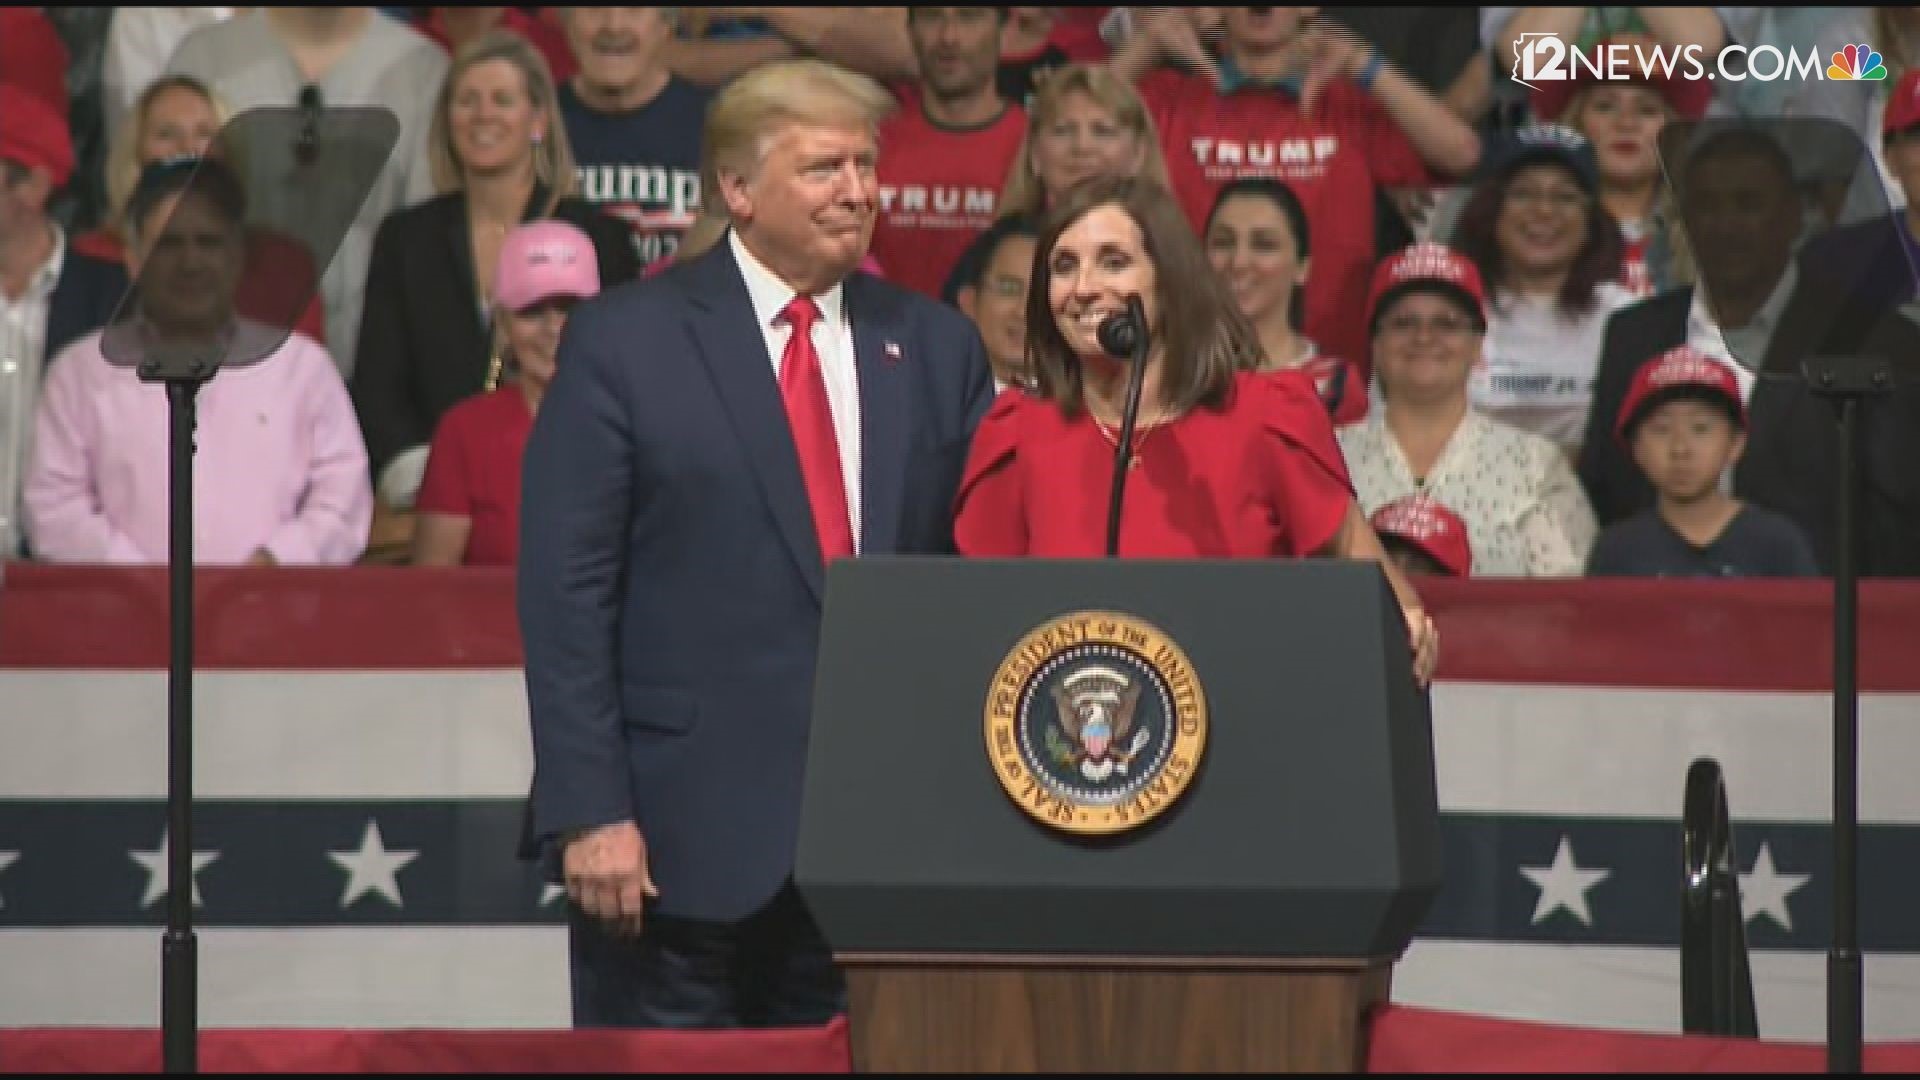 Senator McSally spoke at Trump's campaign rally in Phoenix. She pledged her support for President Trump as she runs to keep her Senate seat in Arizona.